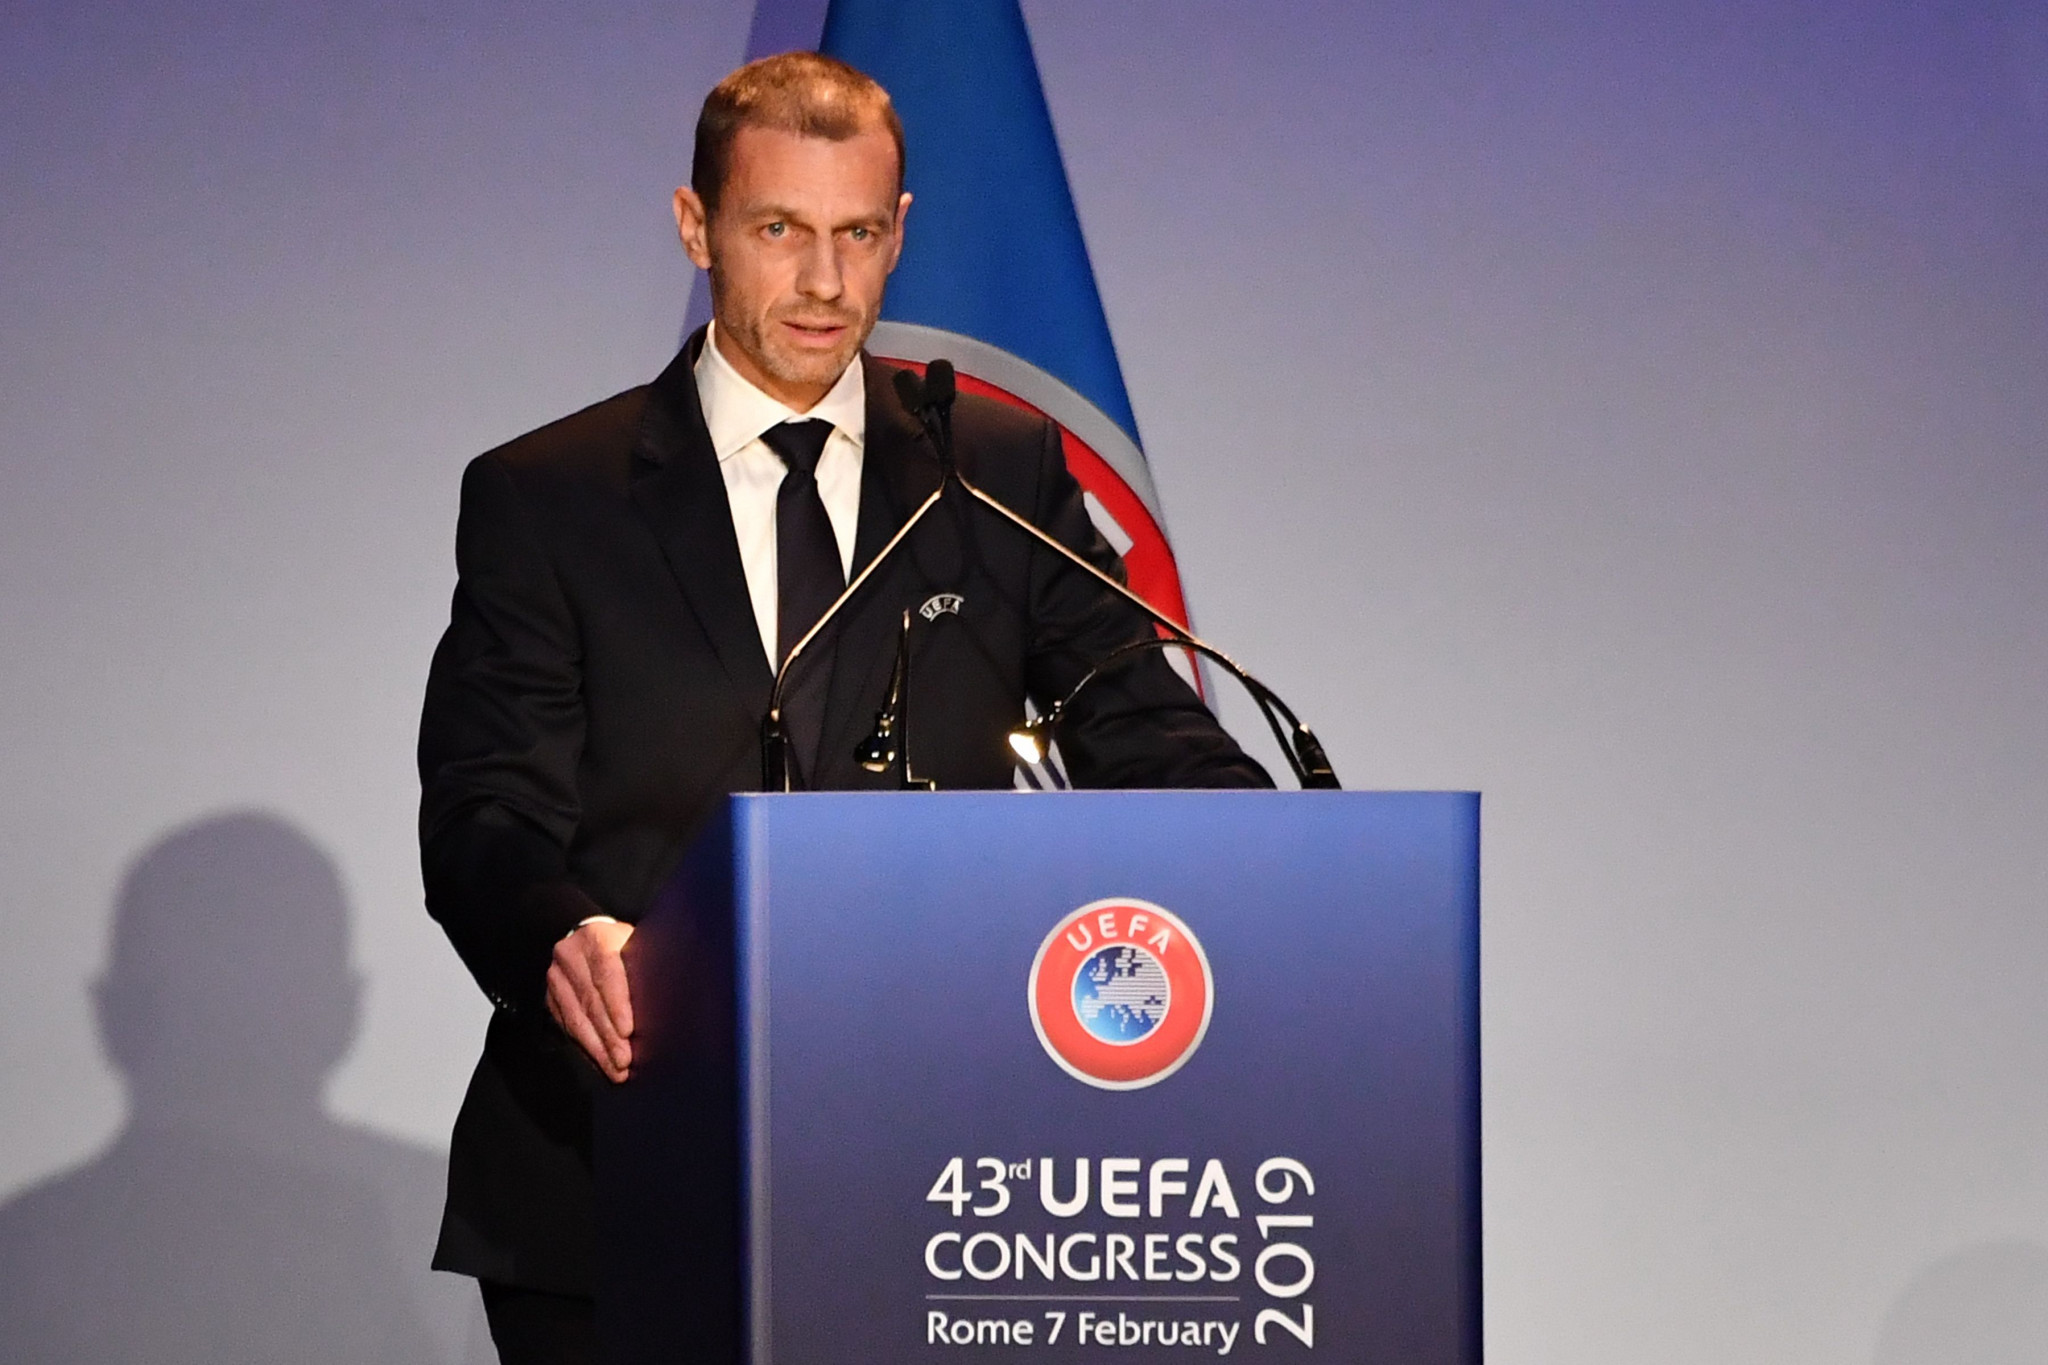 Čeferin re-elected as UEFA President by acclamation as Al-Khelaifi confirmed on Executive Board